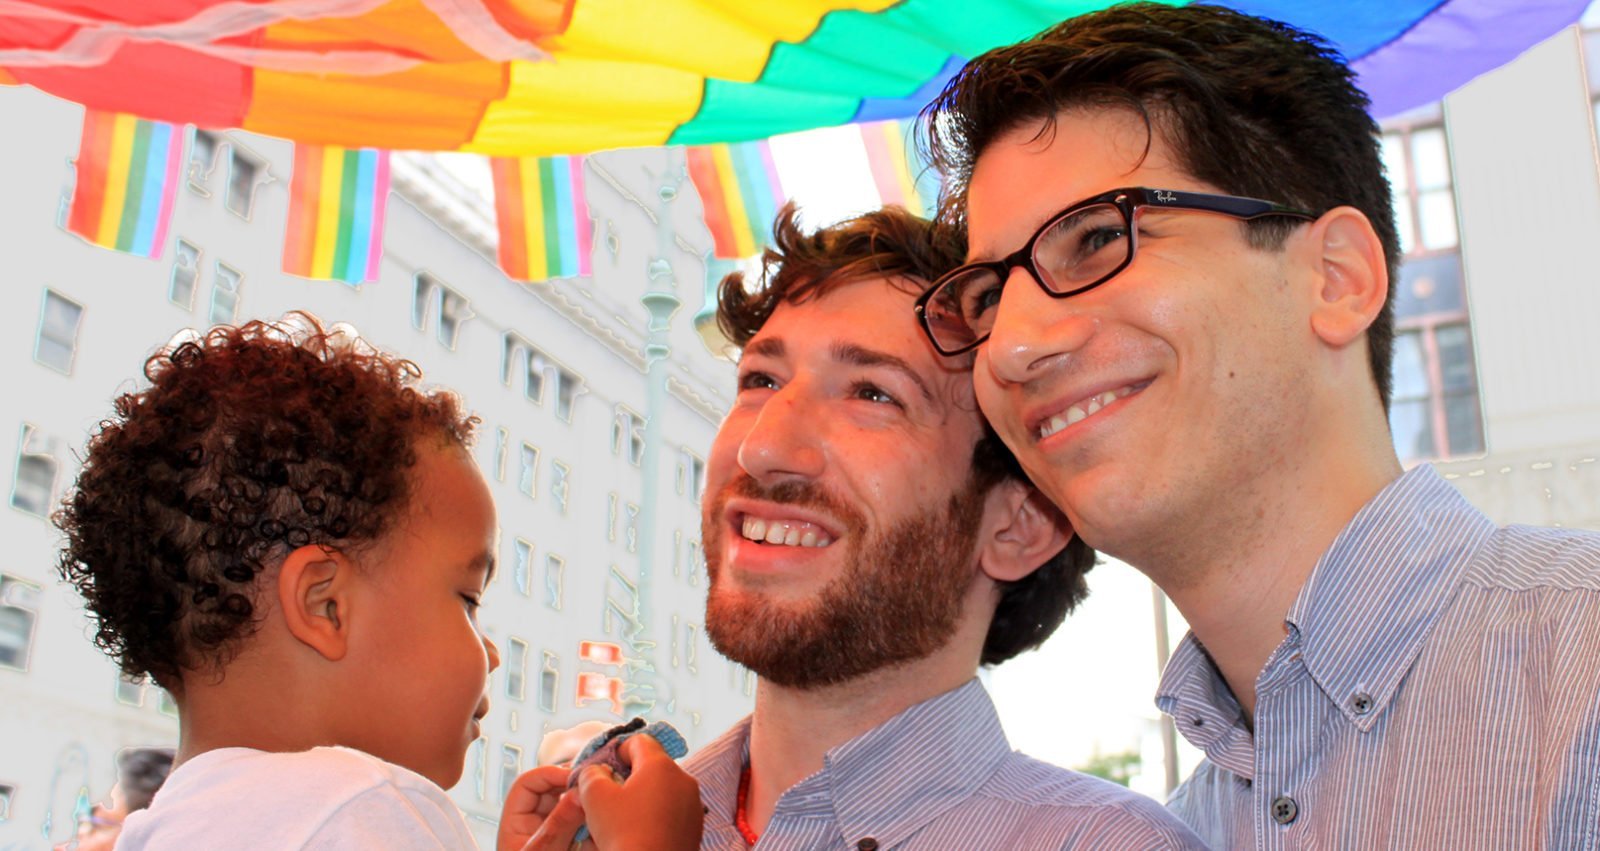 Two men standing together, smiling and holding a young child under a rainbow flag.